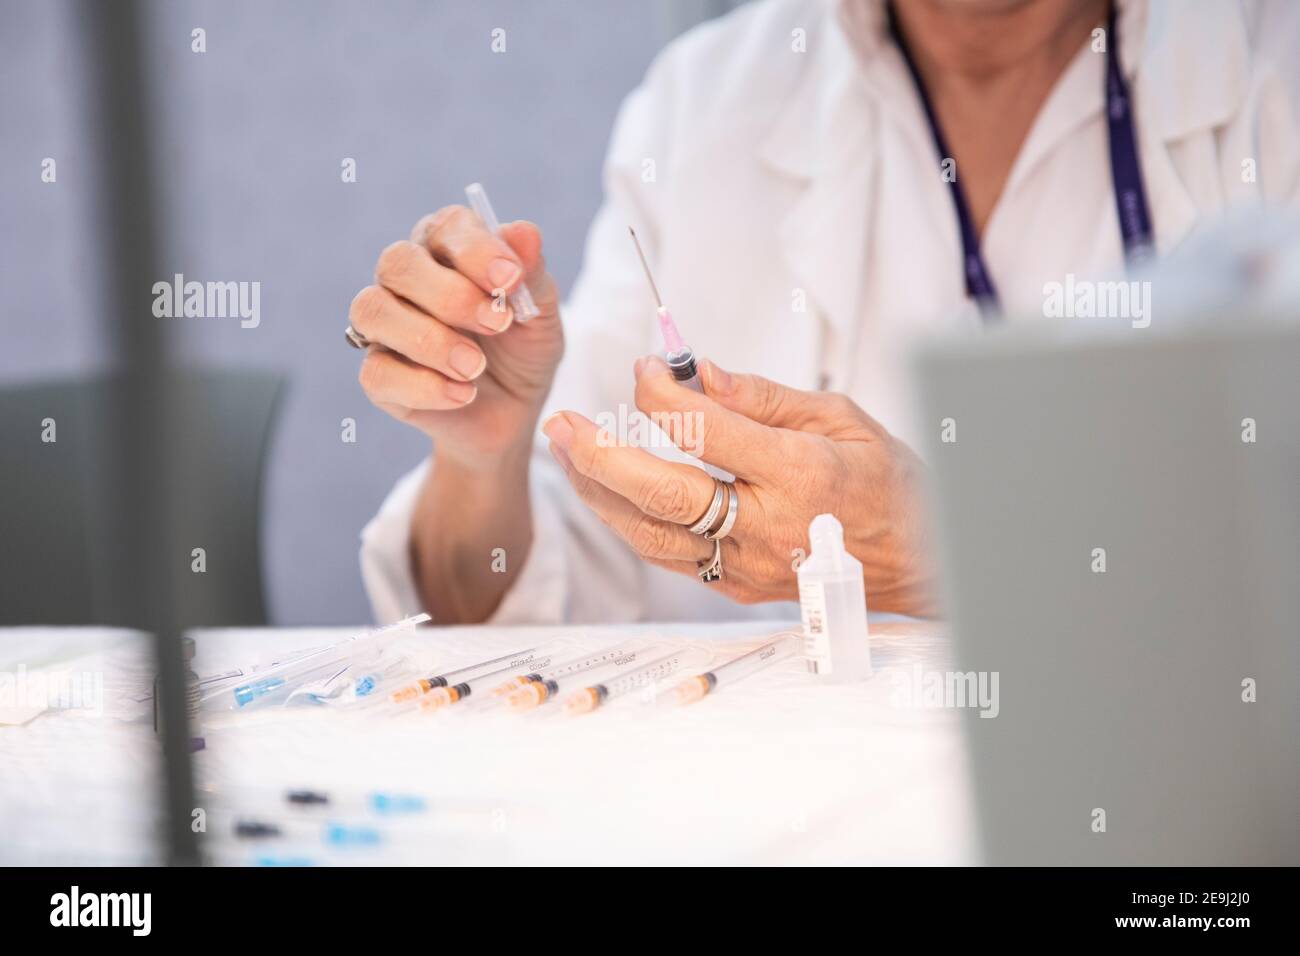 Barcelona, Spain. 2021.02.03. At the 'Hospital de la Santa Creu i Sant Pau', the week of February 1 to 7, they are administering the second dose of the Pfizer vaccine to all hospital staff (between 5,000 and 6,000 people). Stock Photo